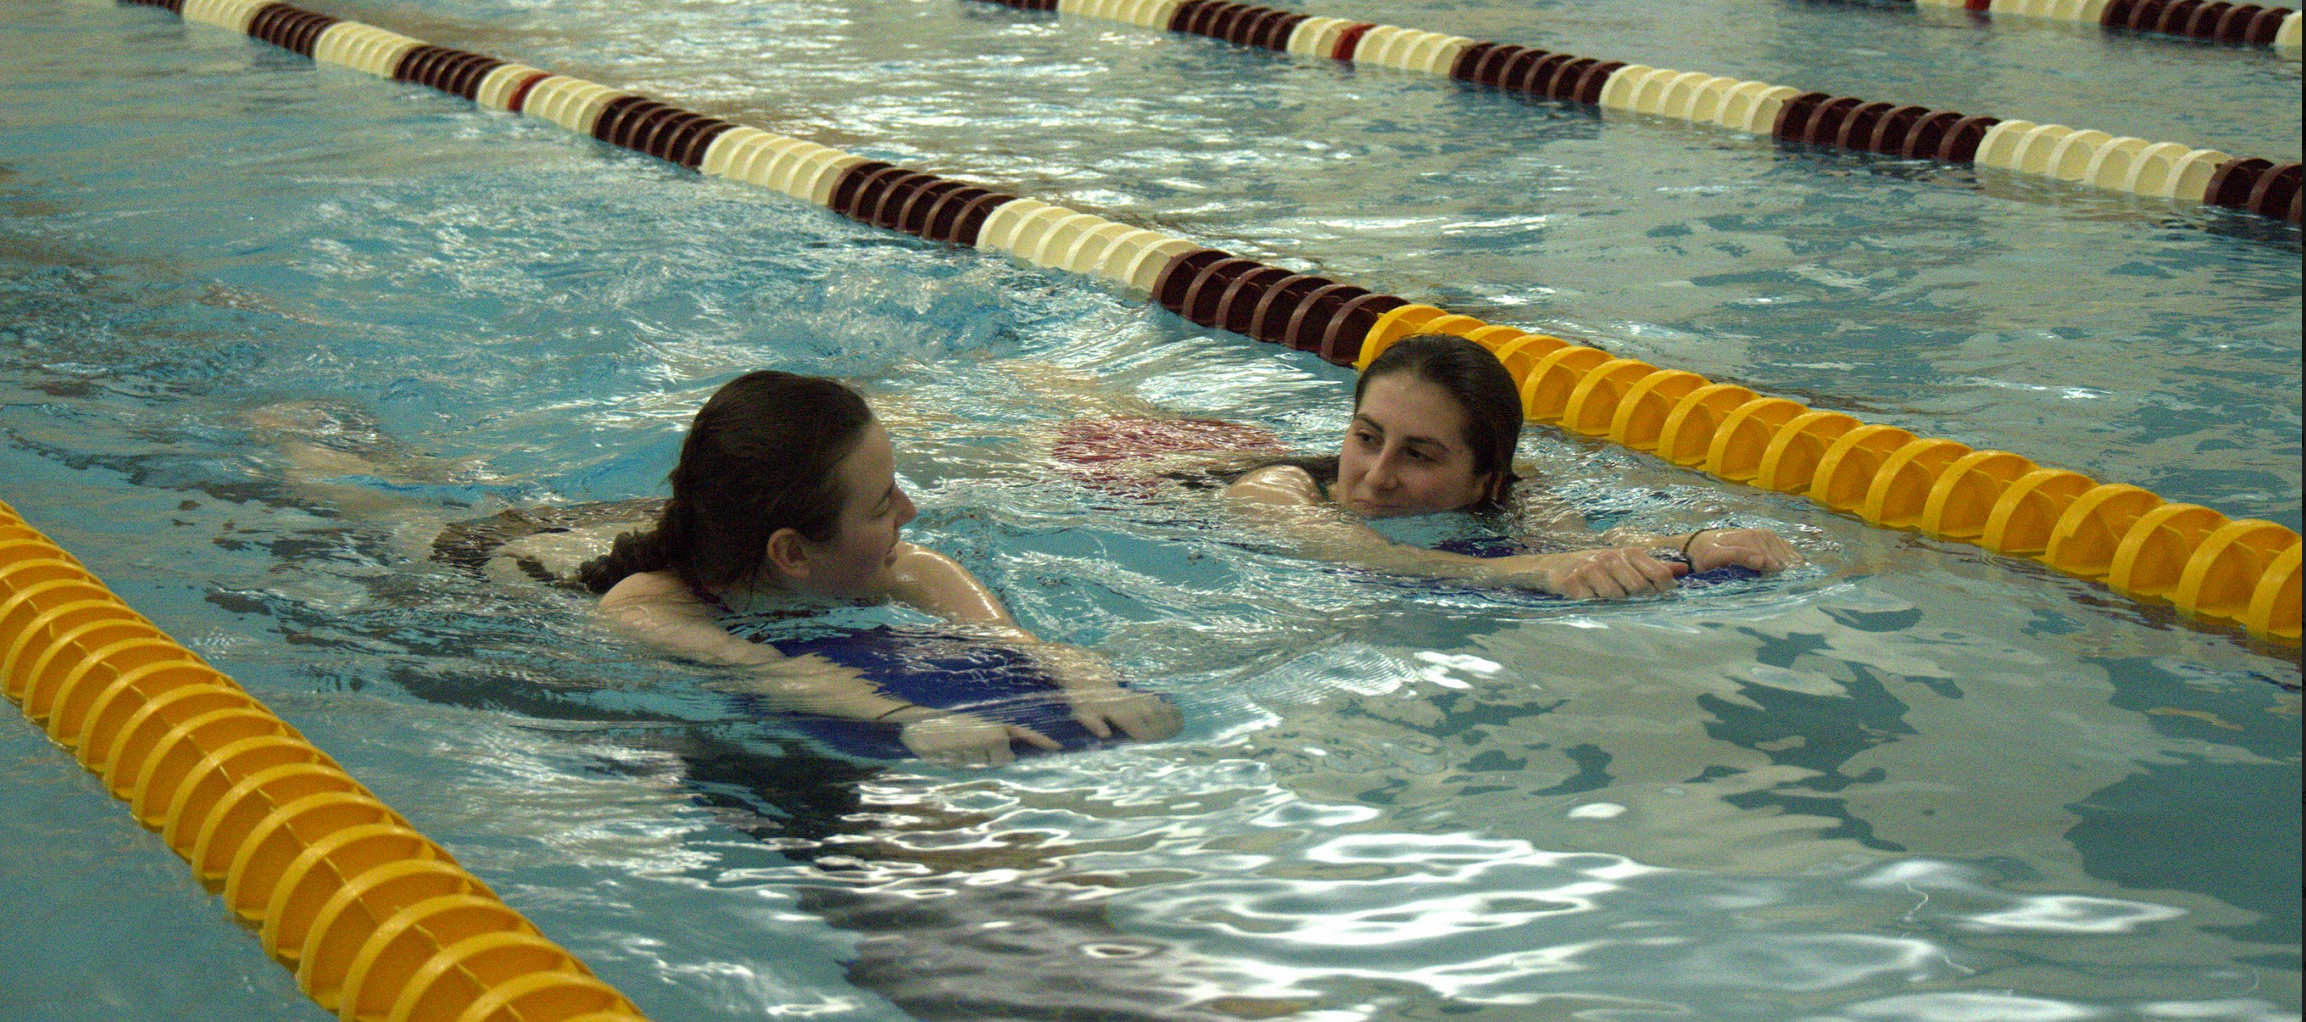 students lap swimming in the pool